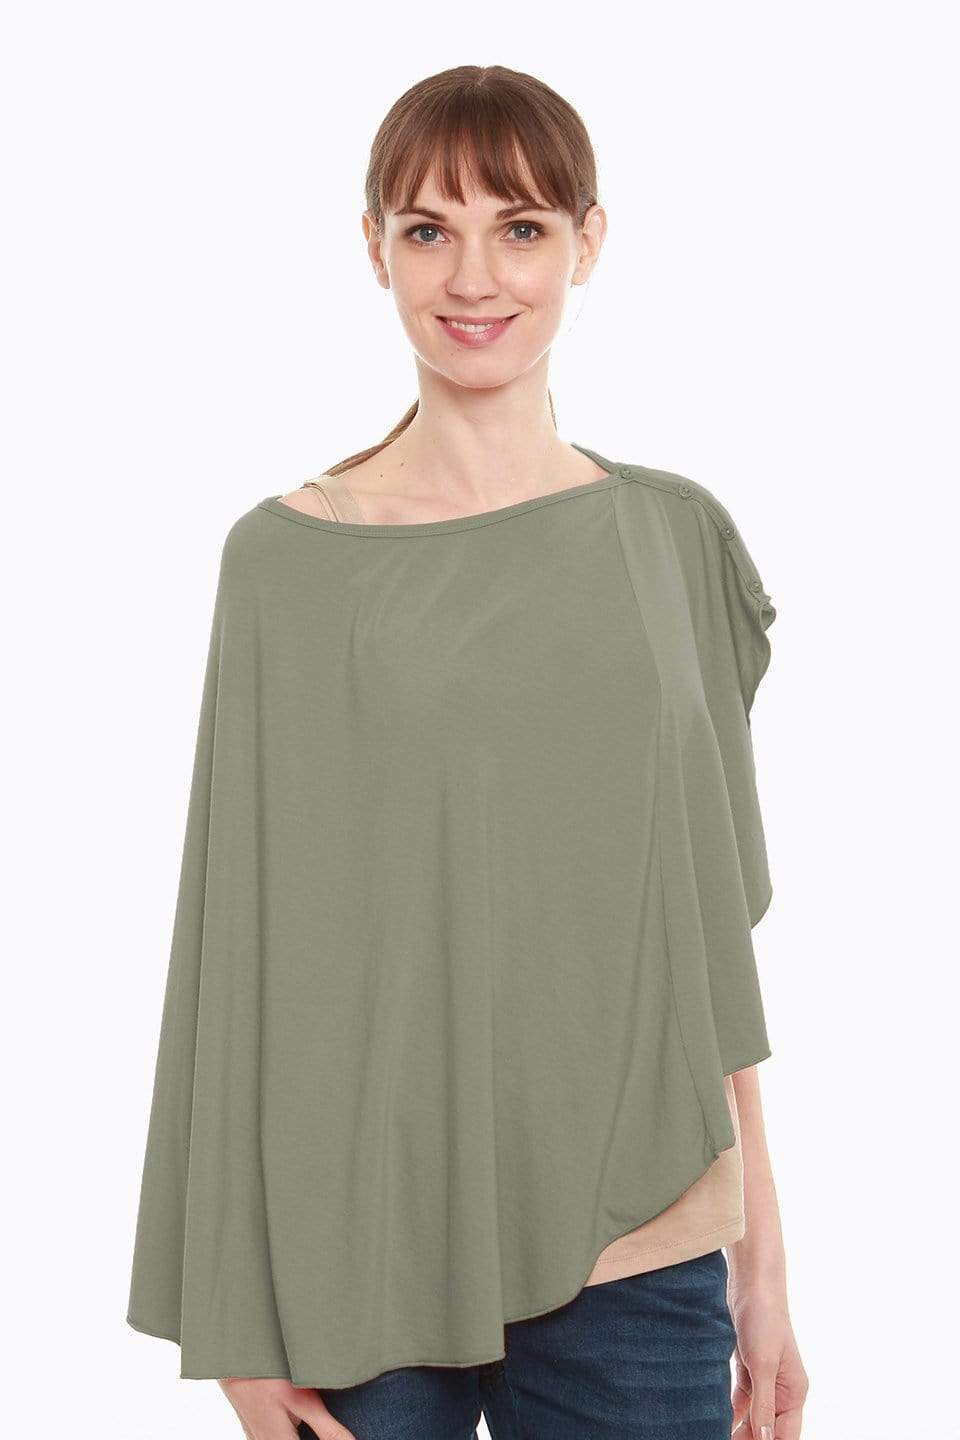 Bambi Cape Olive Green